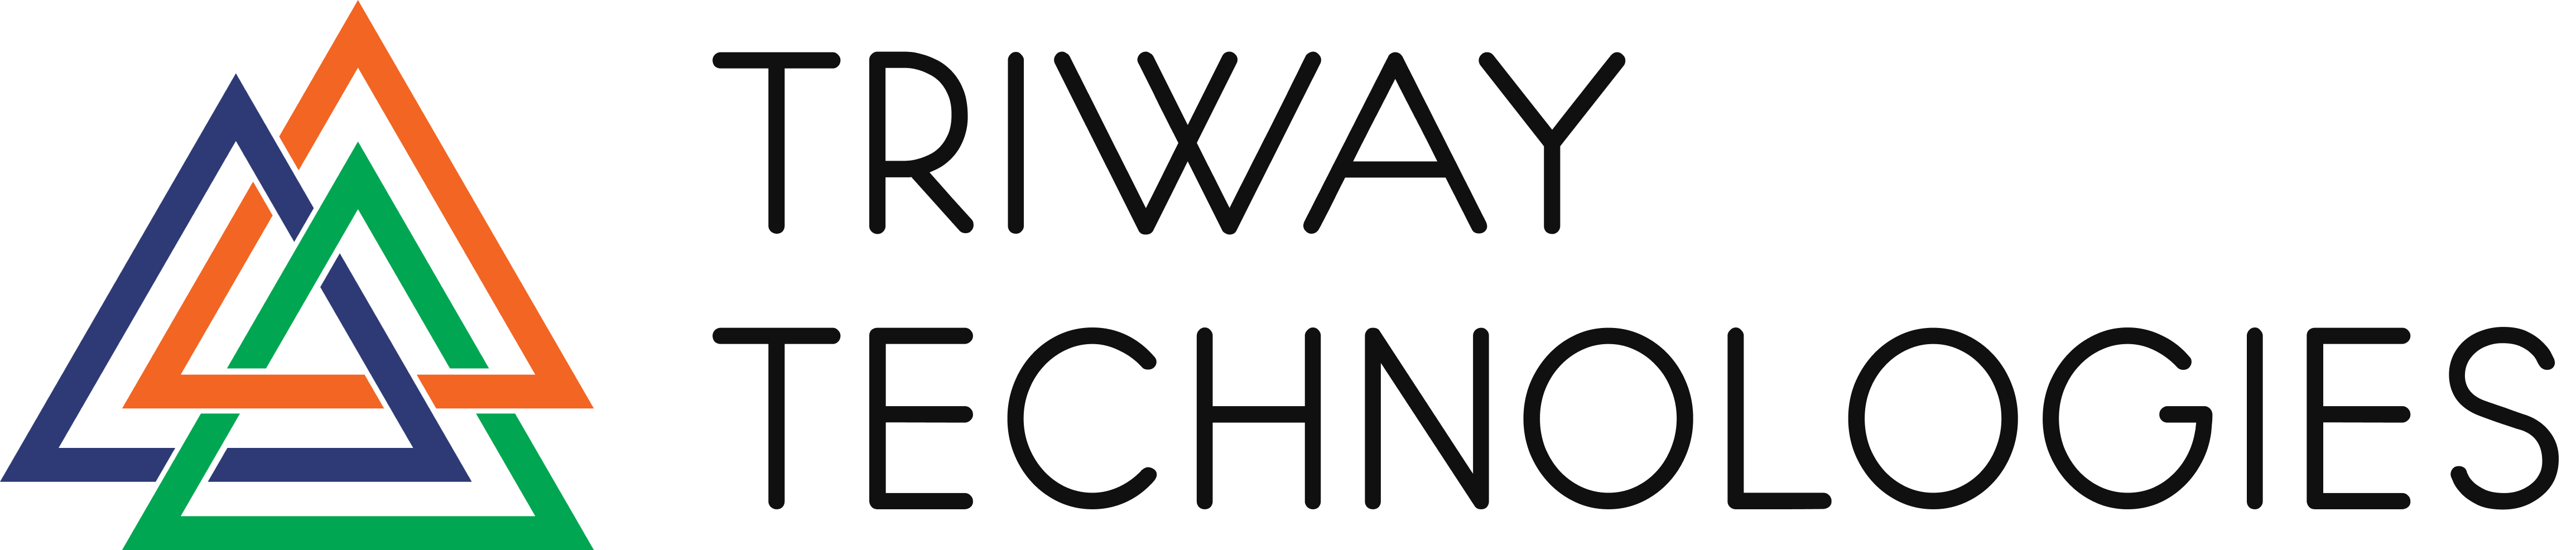 Triway Technology